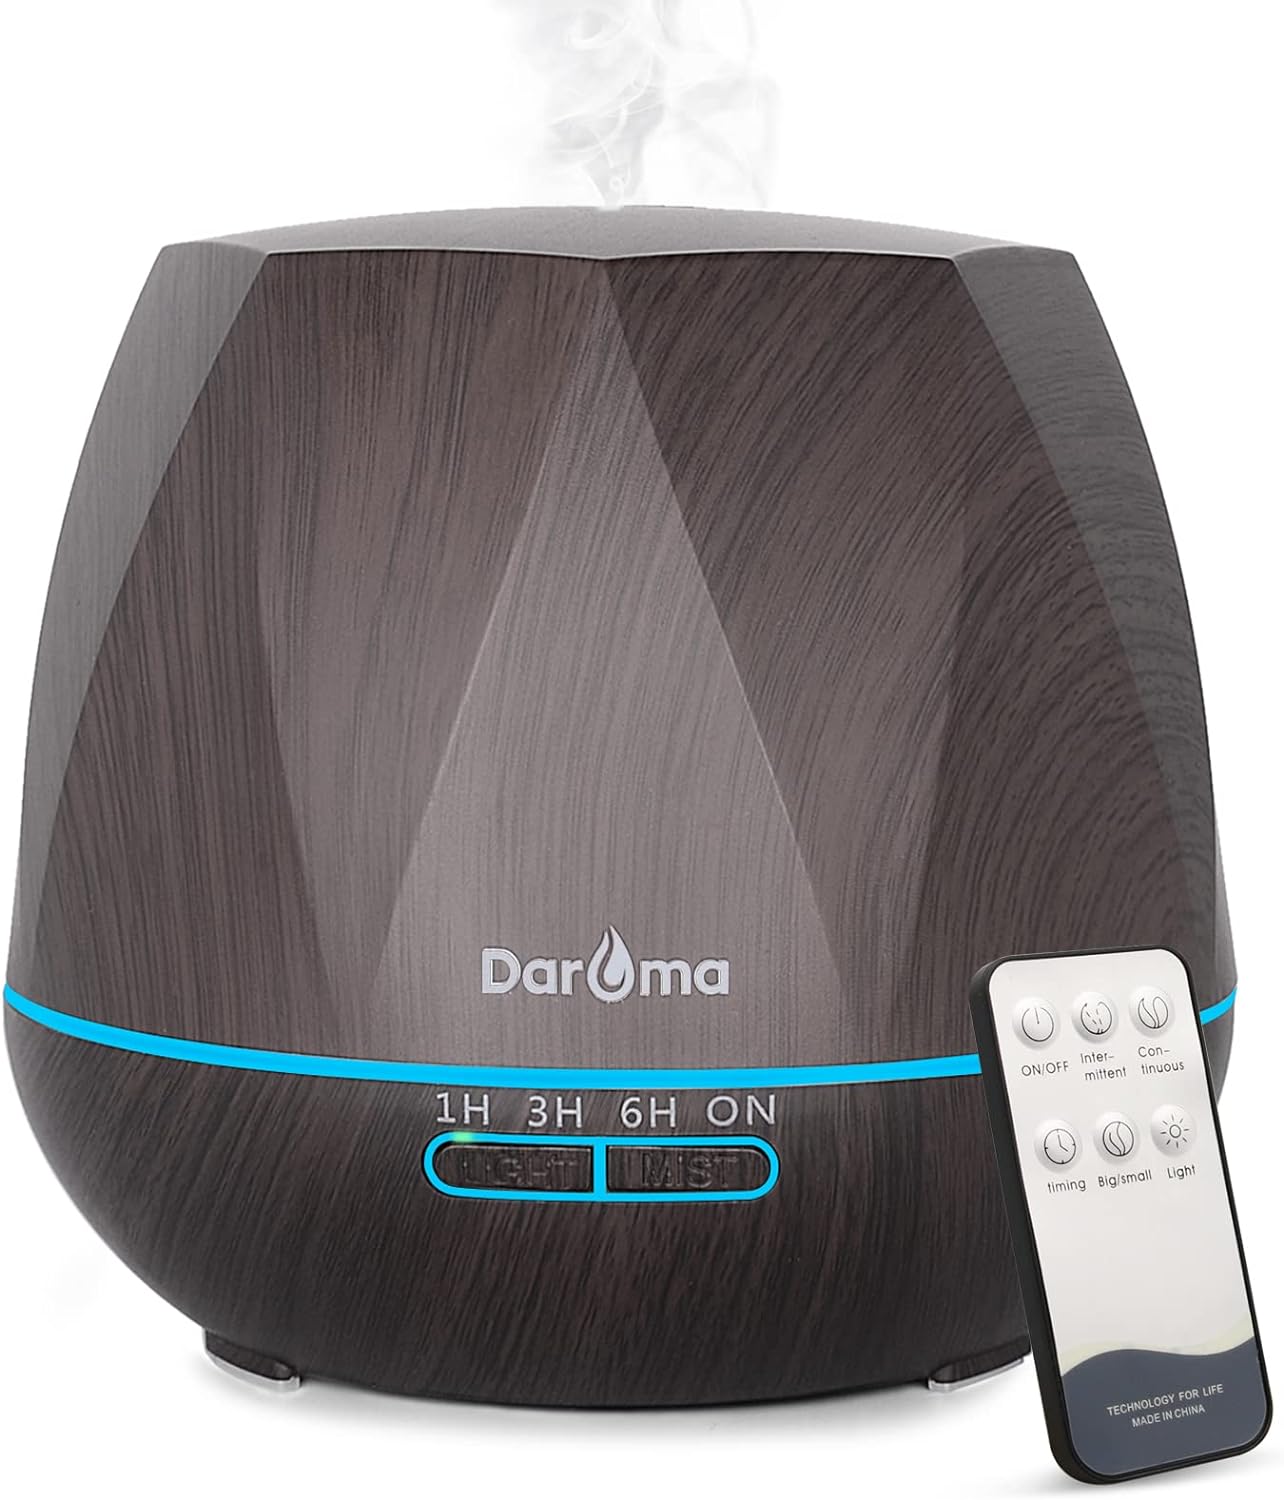 Large capacity, defuses essential oils easily nice steam,does not clog and very easy maitenance. Love it !